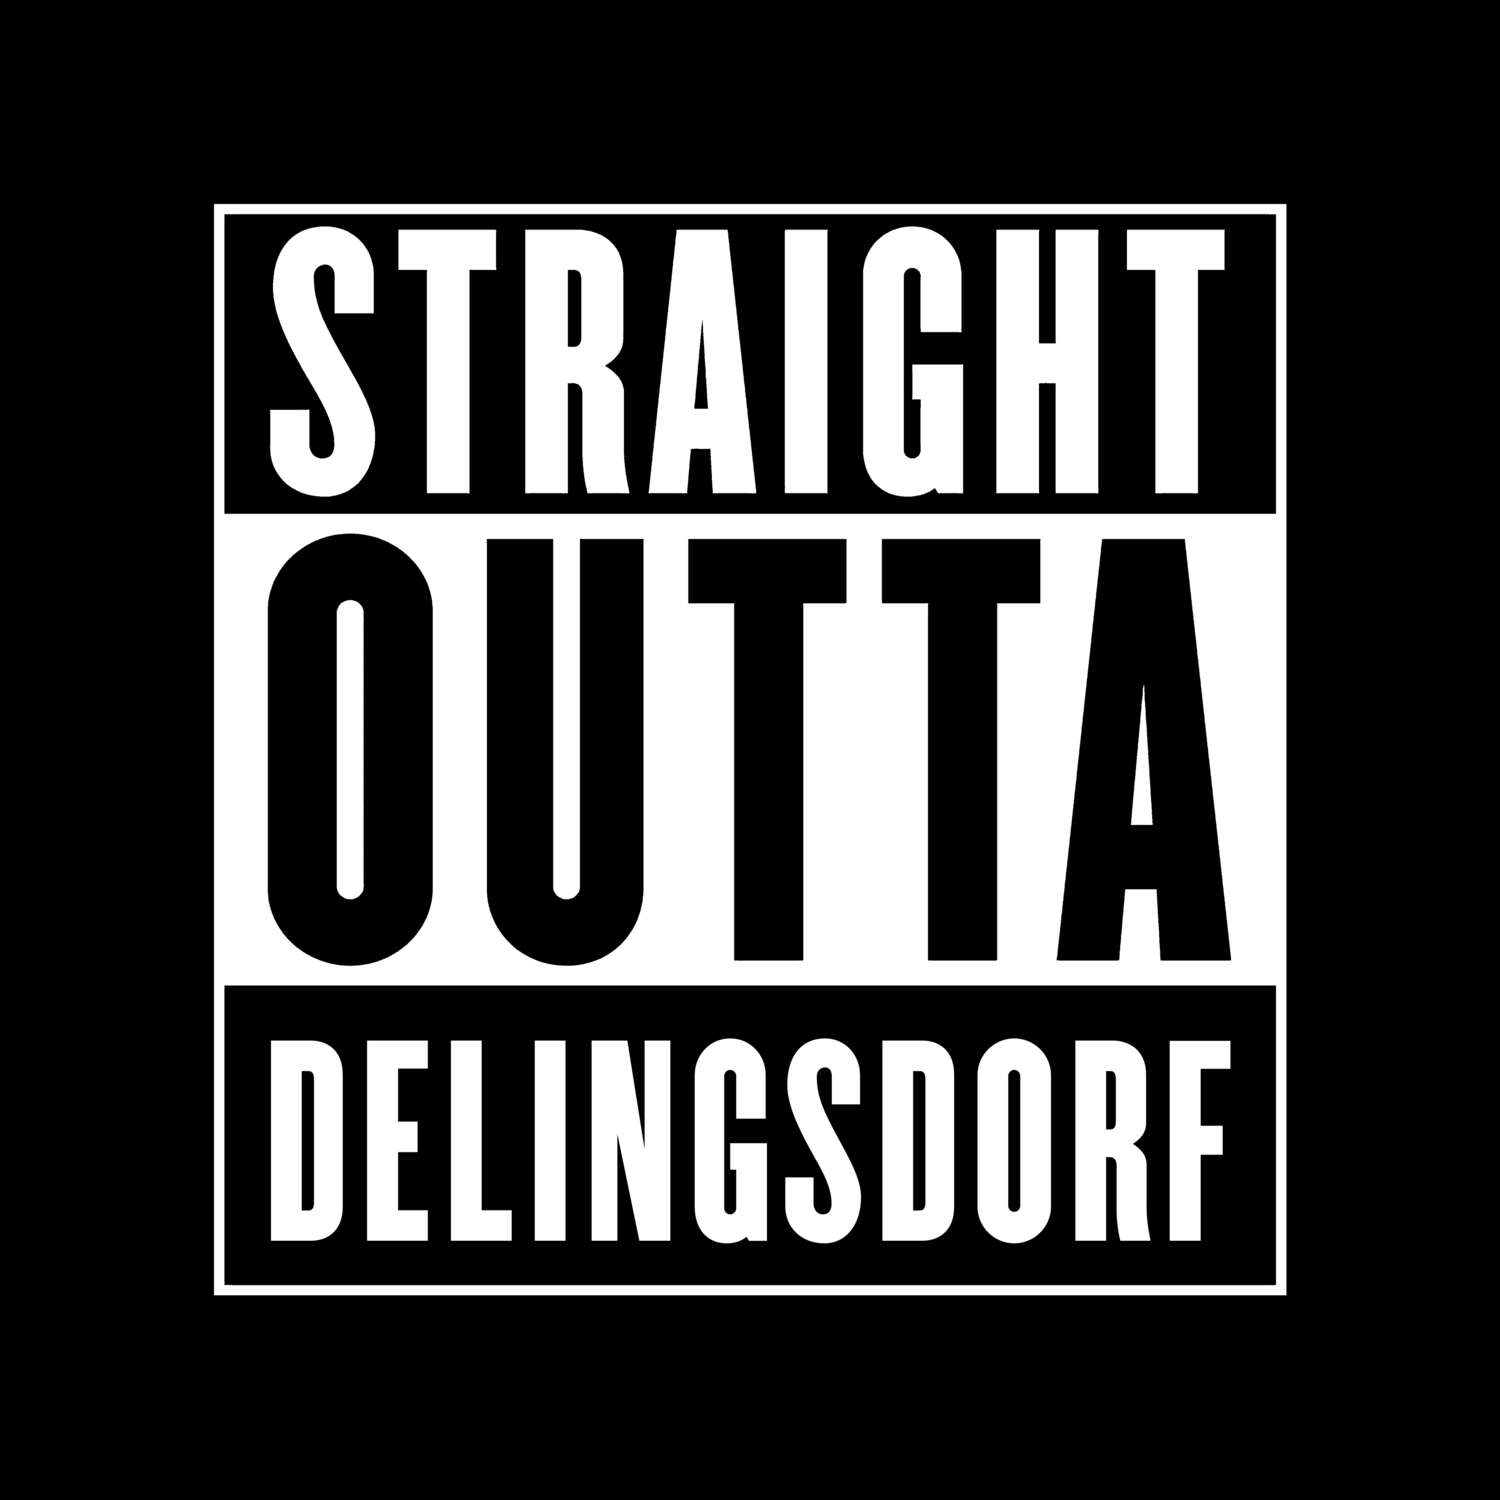 Delingsdorf T-Shirt »Straight Outta«